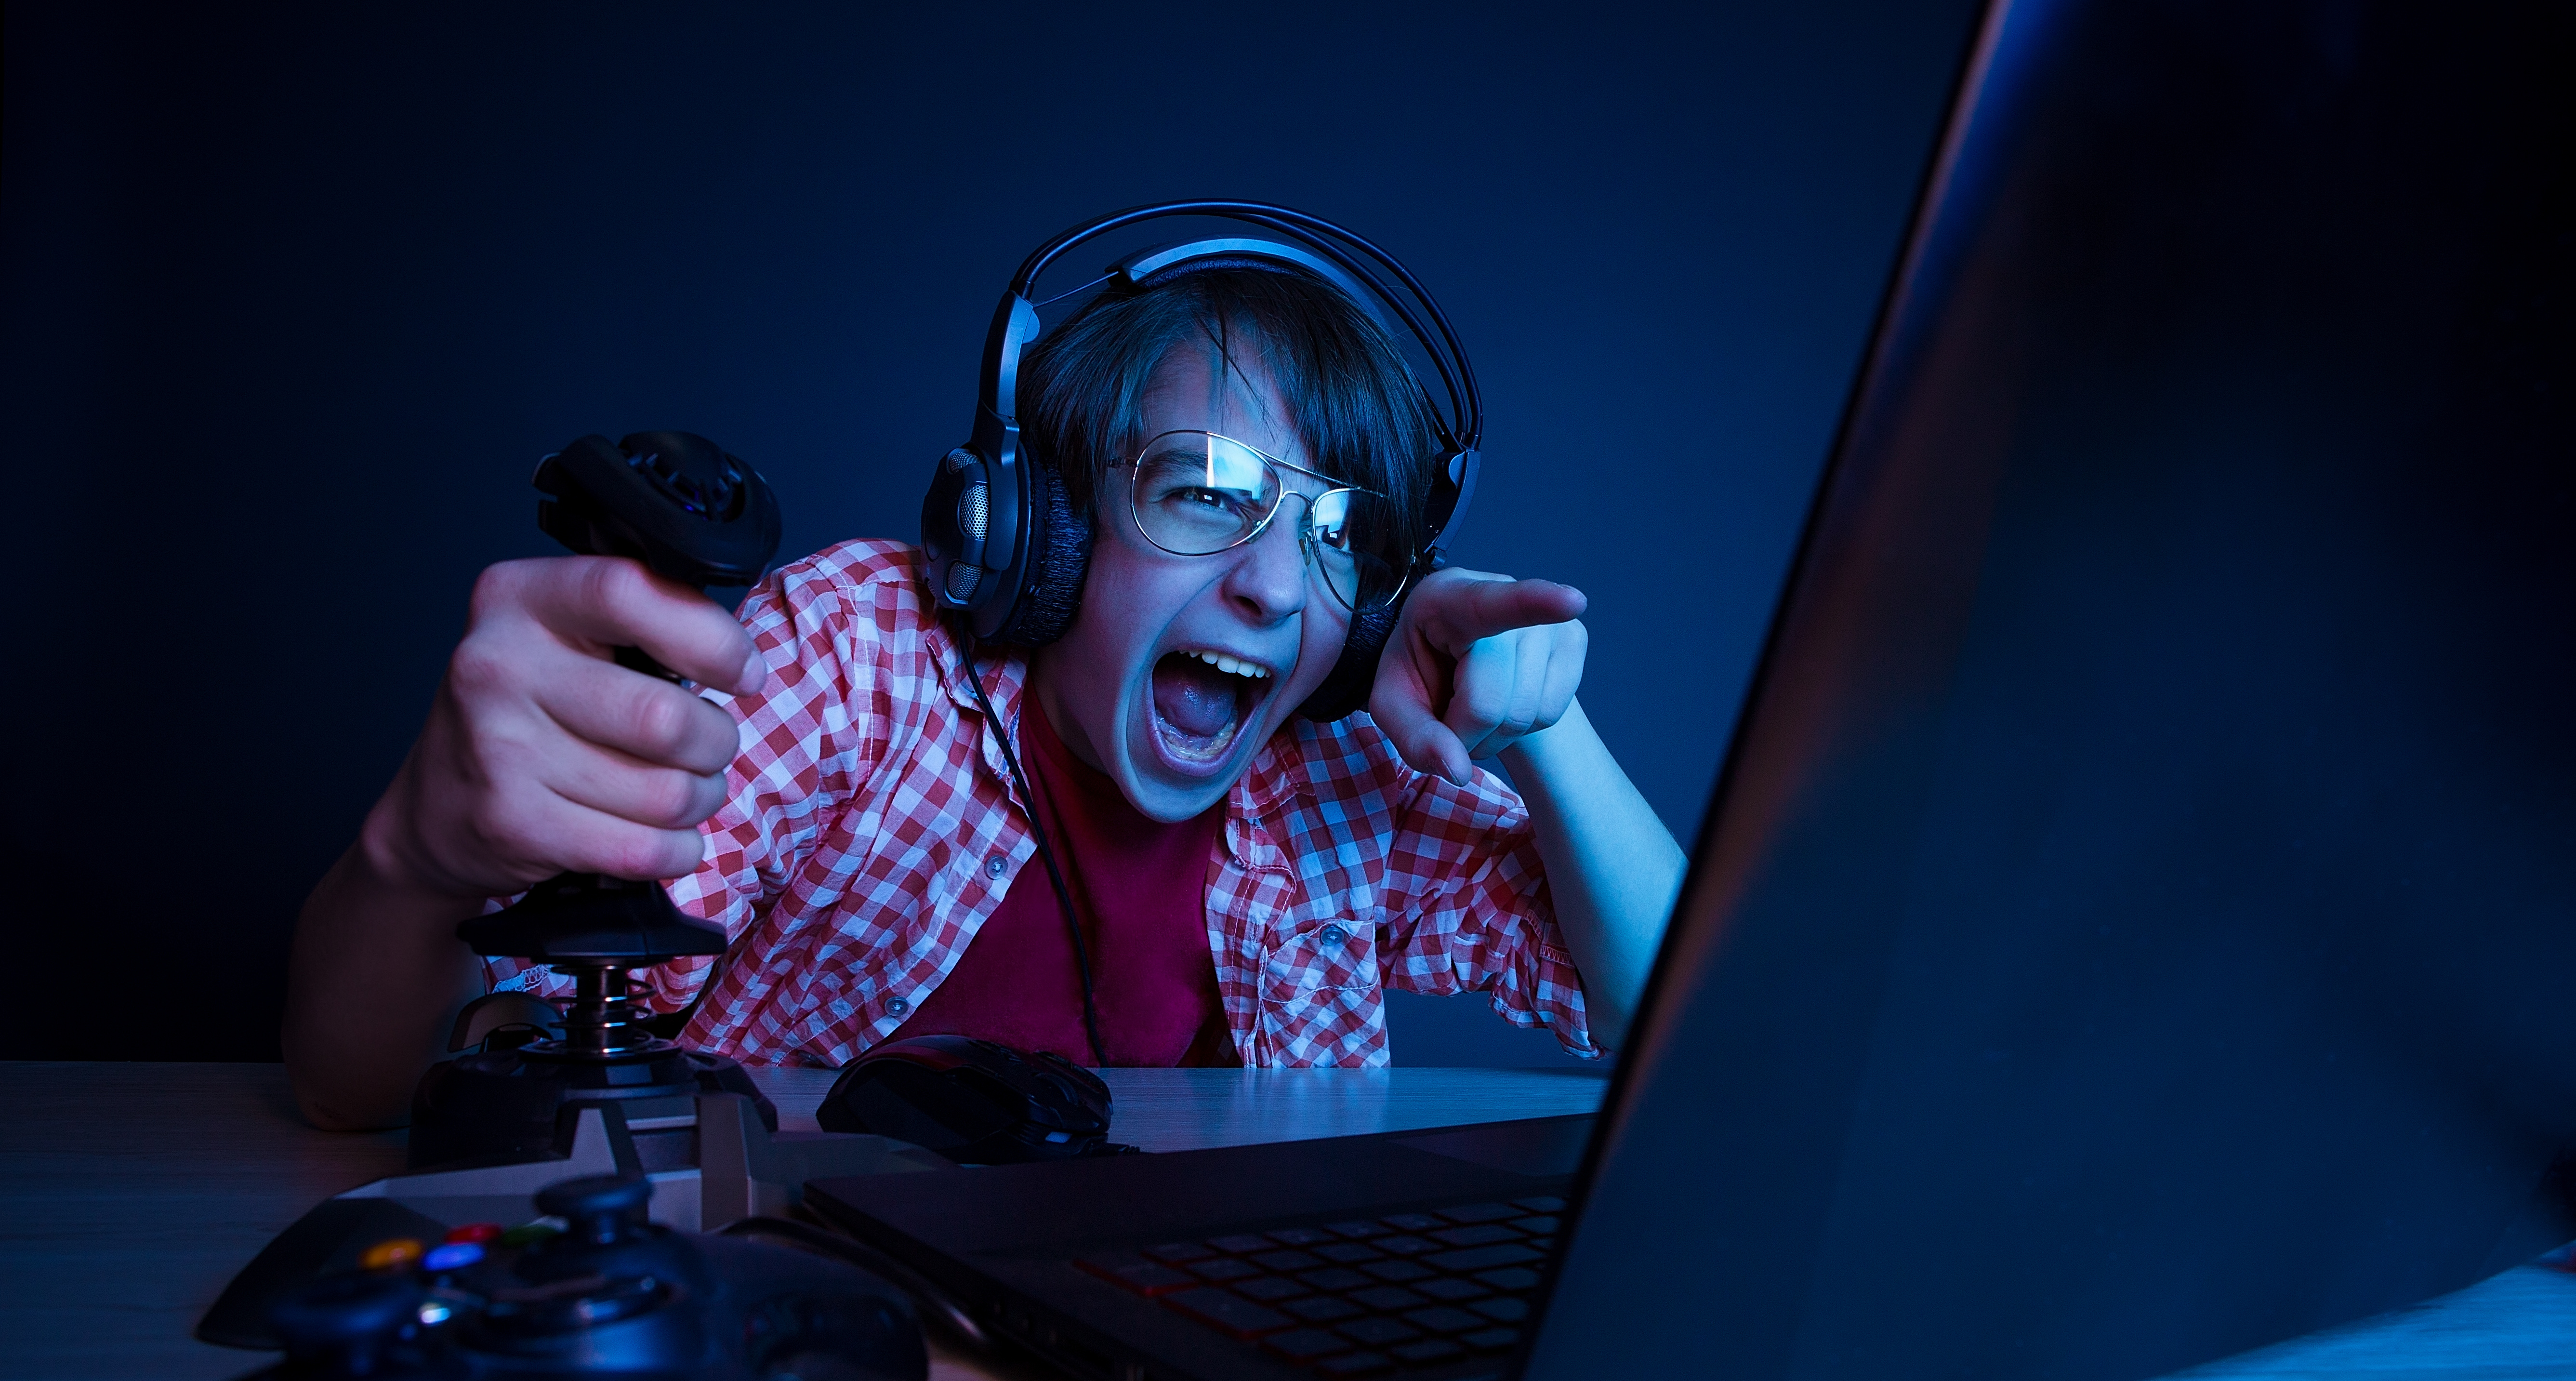 7 Security Tips For Gamers